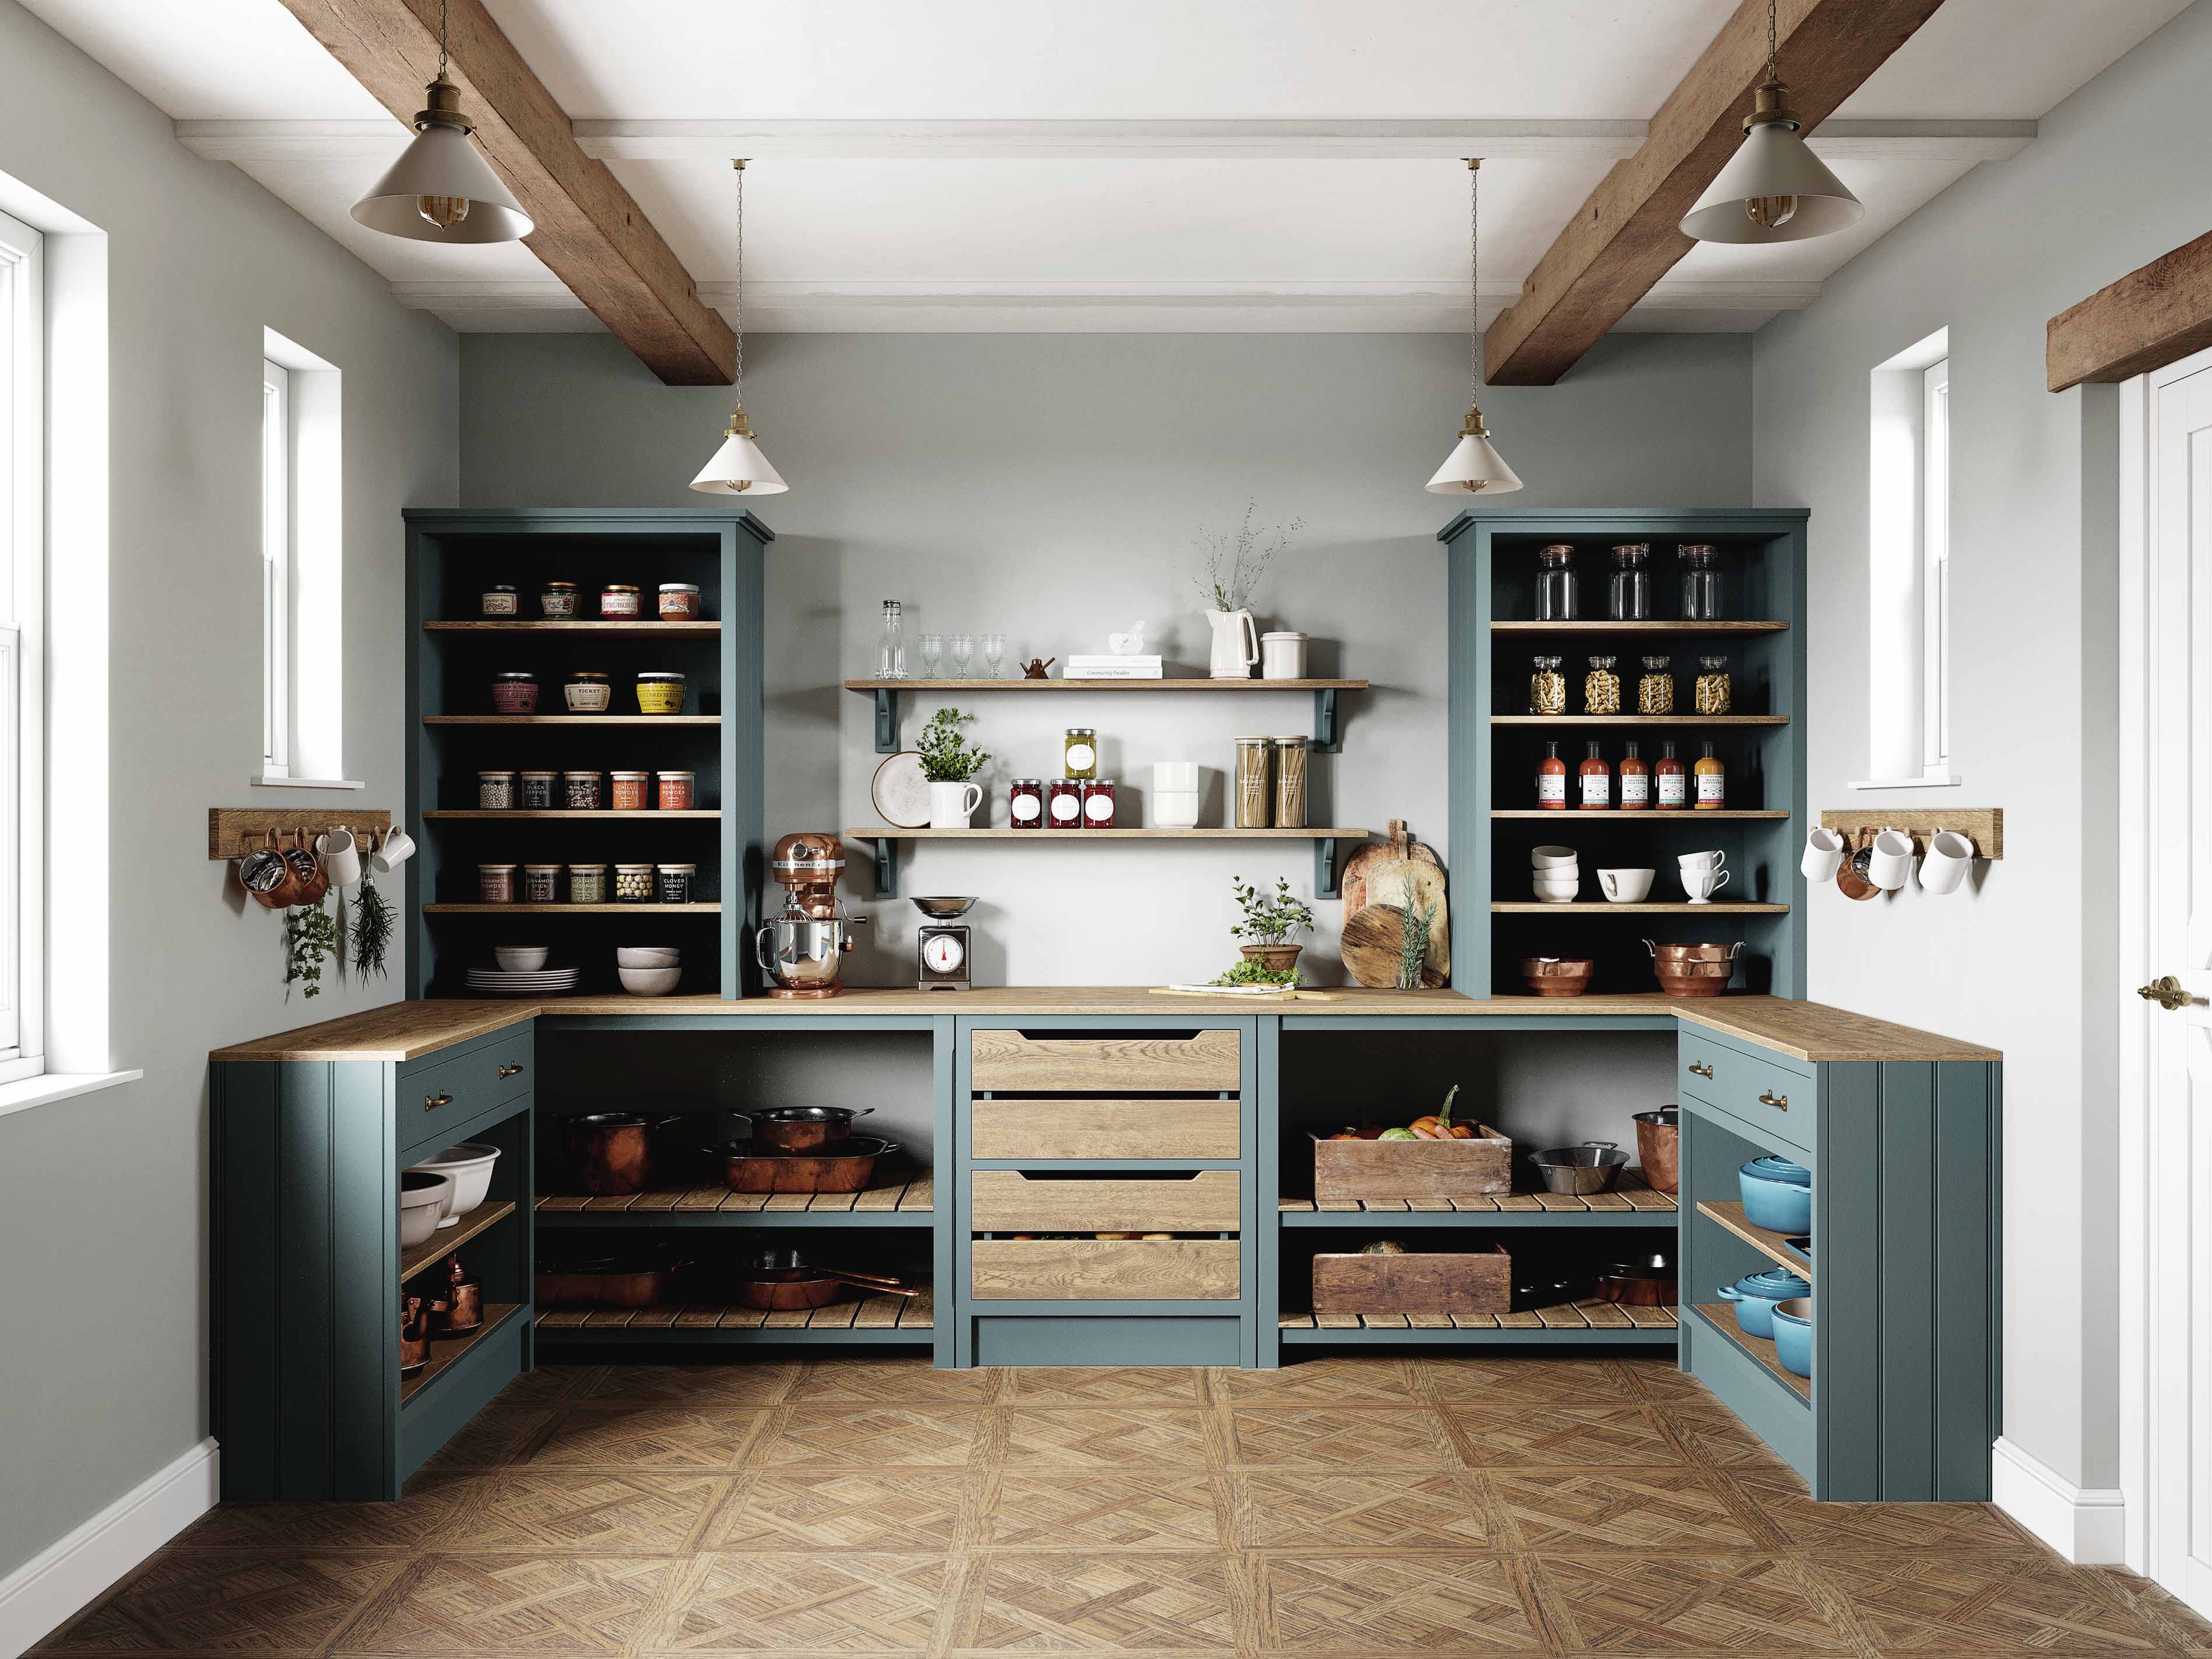 001. Bespoke pantry larder shaker style Farrow and Ball Mylands copper brass vegetable crates Perrin and Rowe Jim Lawrence Alton Hampshire